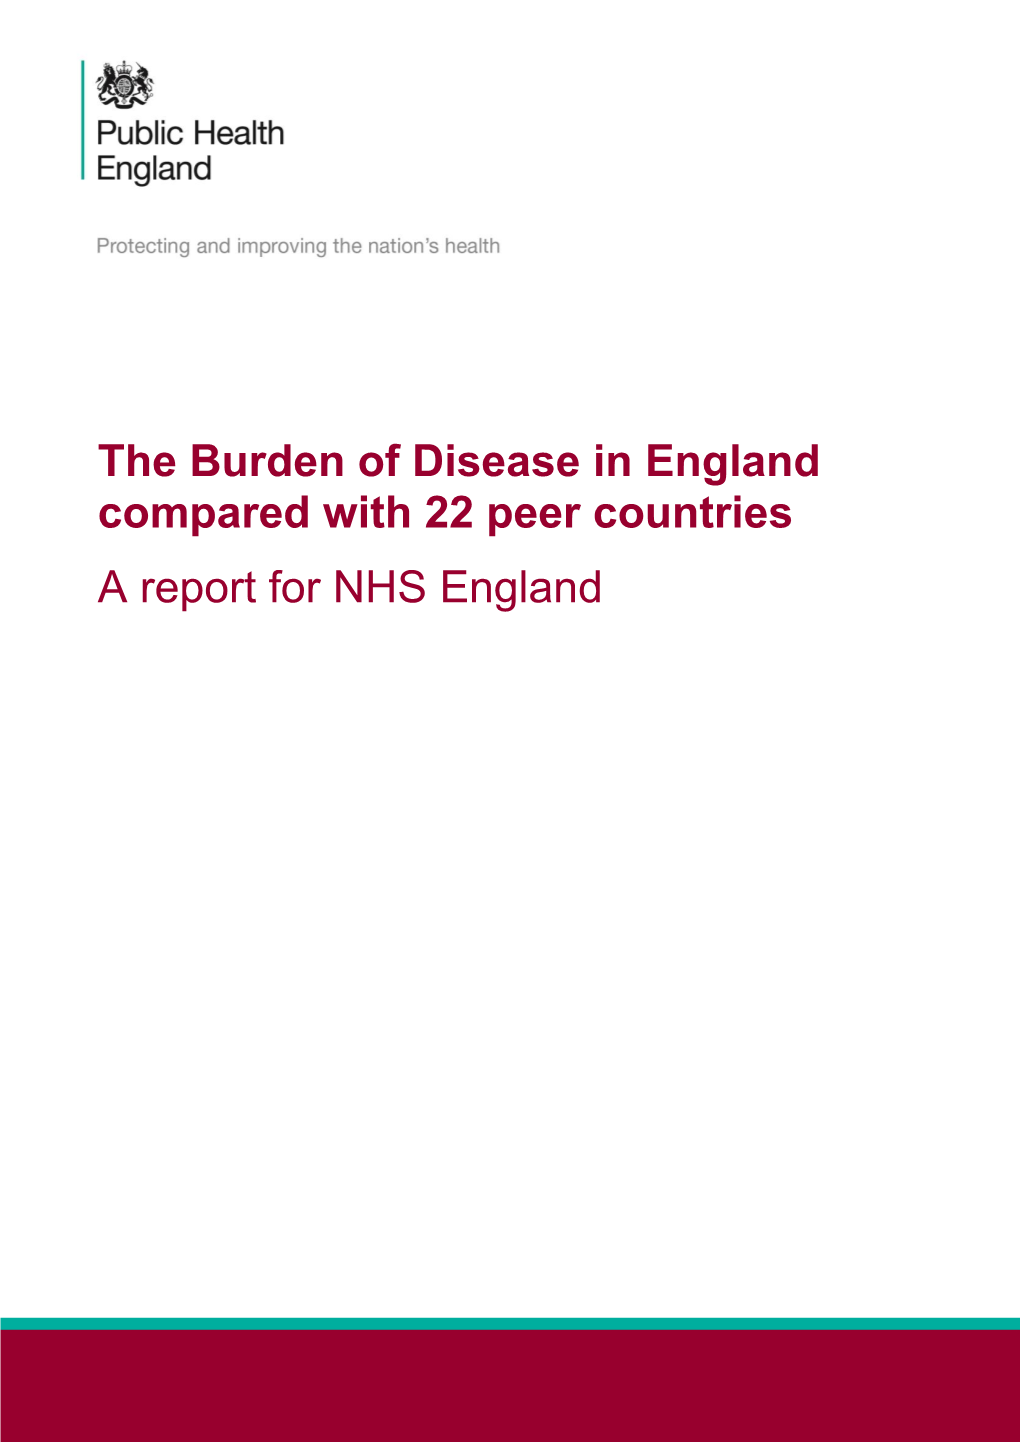 Burden of Disease in England Compared with 22 Peer Countries